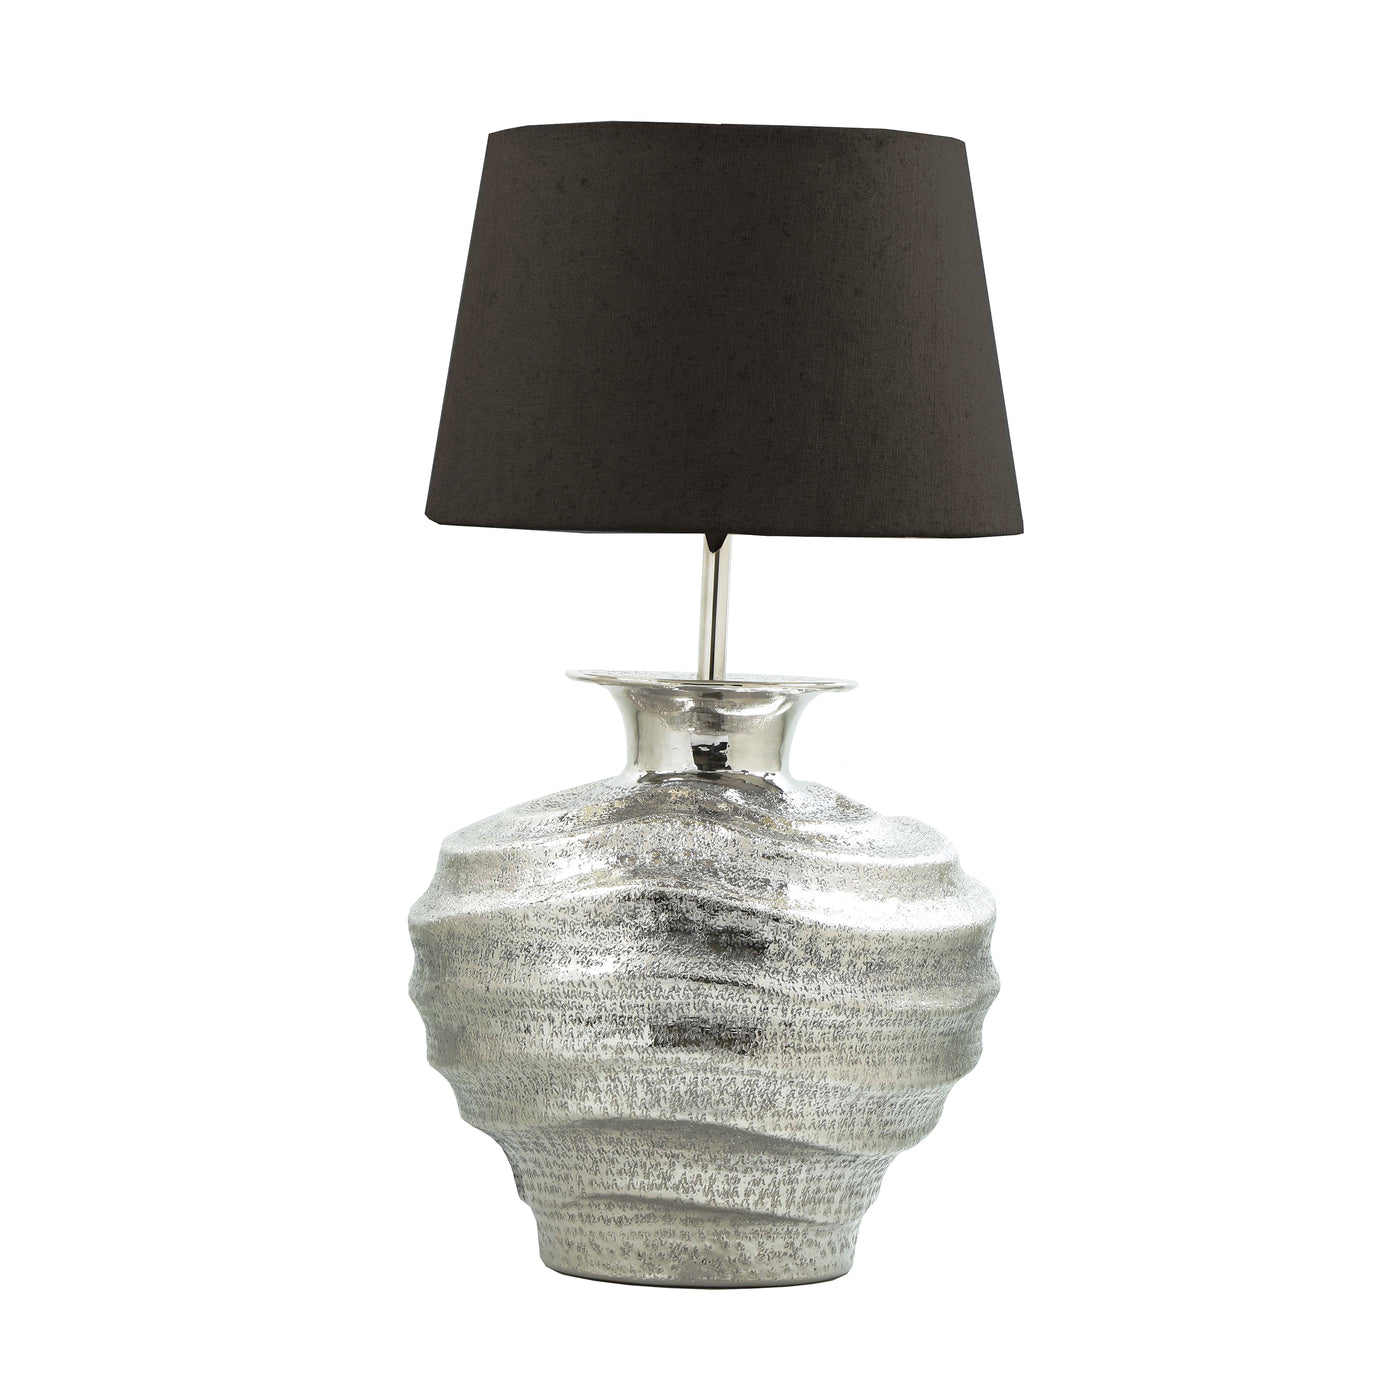 TABLE LAMP WITH BLACK SHADE 18"